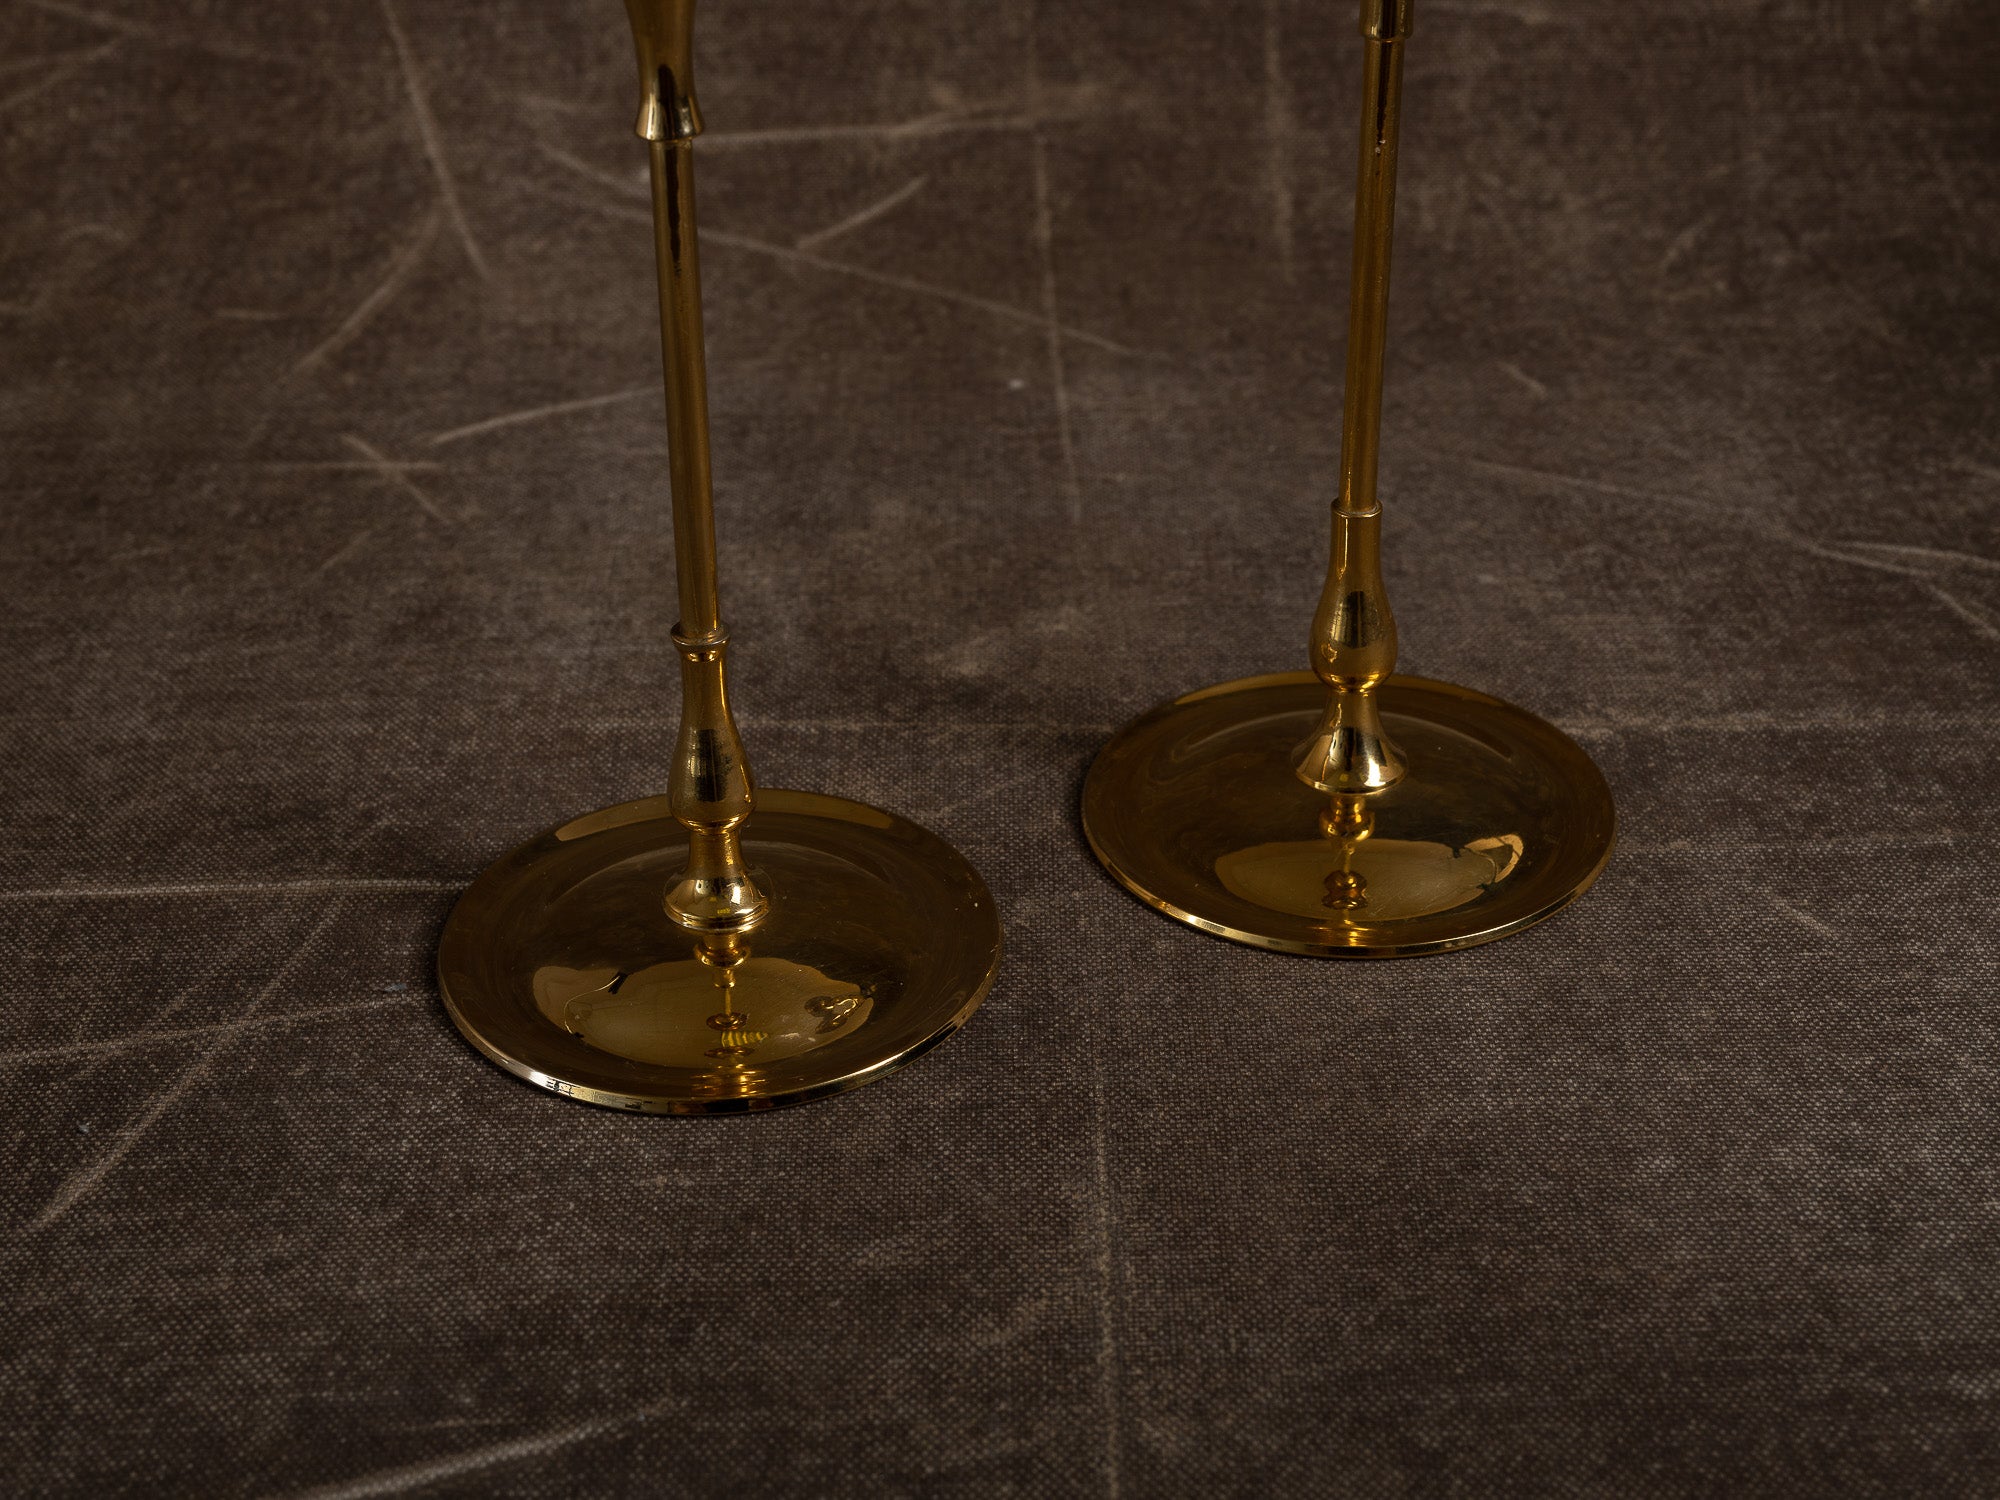 Paire de flambeaux, suiveur de Gunnar Ander, Suède (vers 1960)..Set of 2 candle holders, in the style of Gunnar Ander, Sweden (circa 1960)